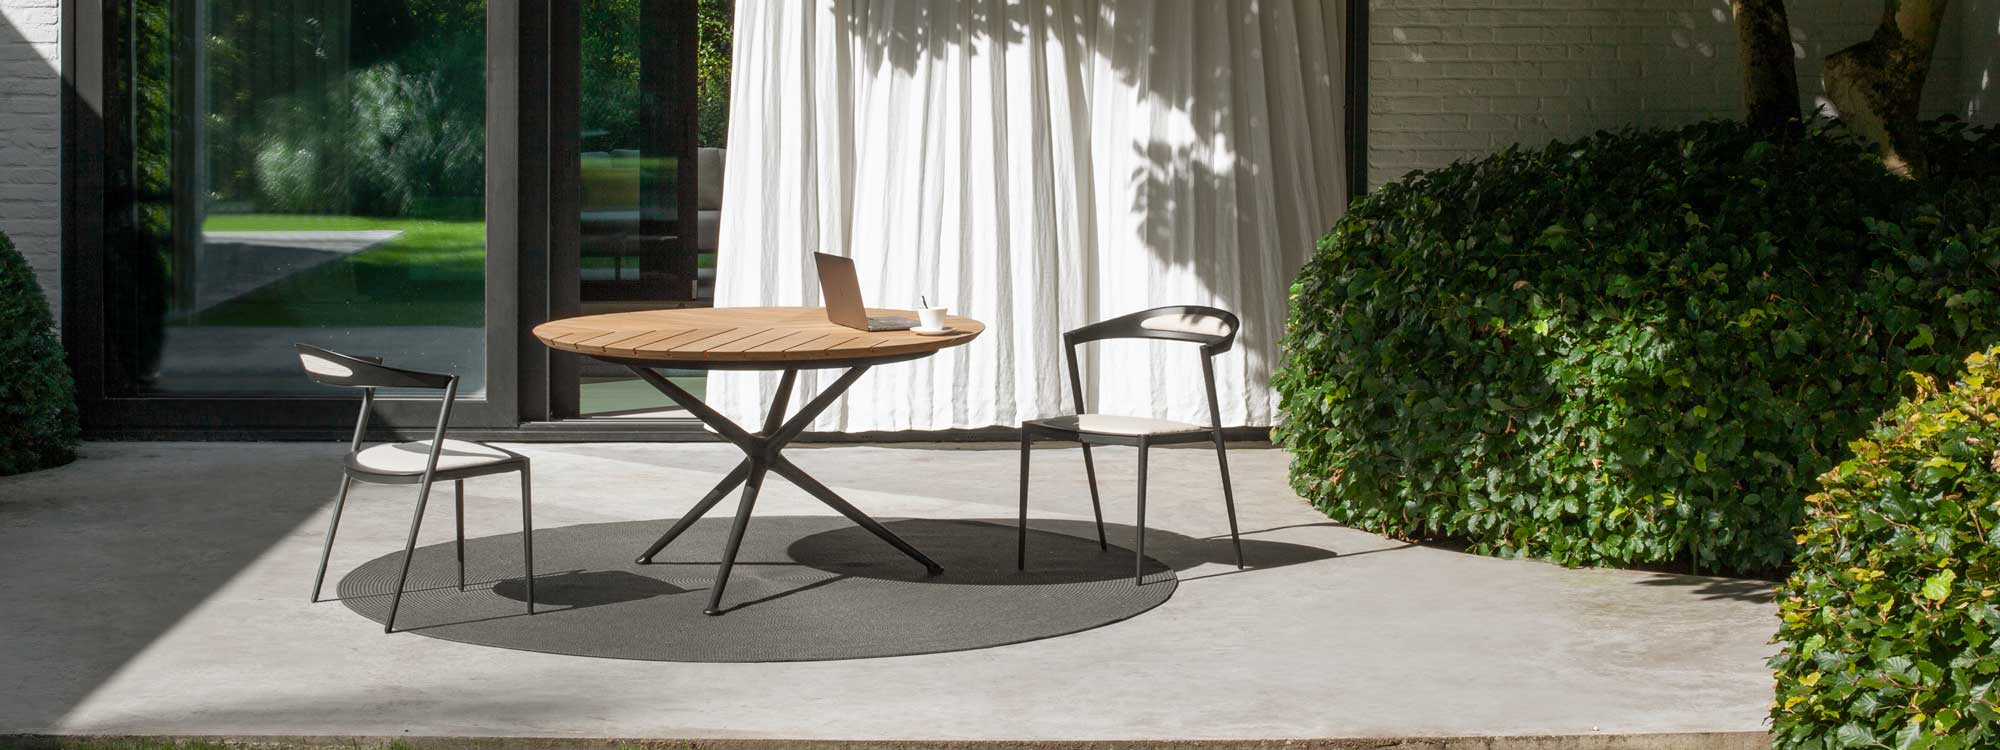 Image of Styletto chair and Exes table on minimalist poured concrete terrace